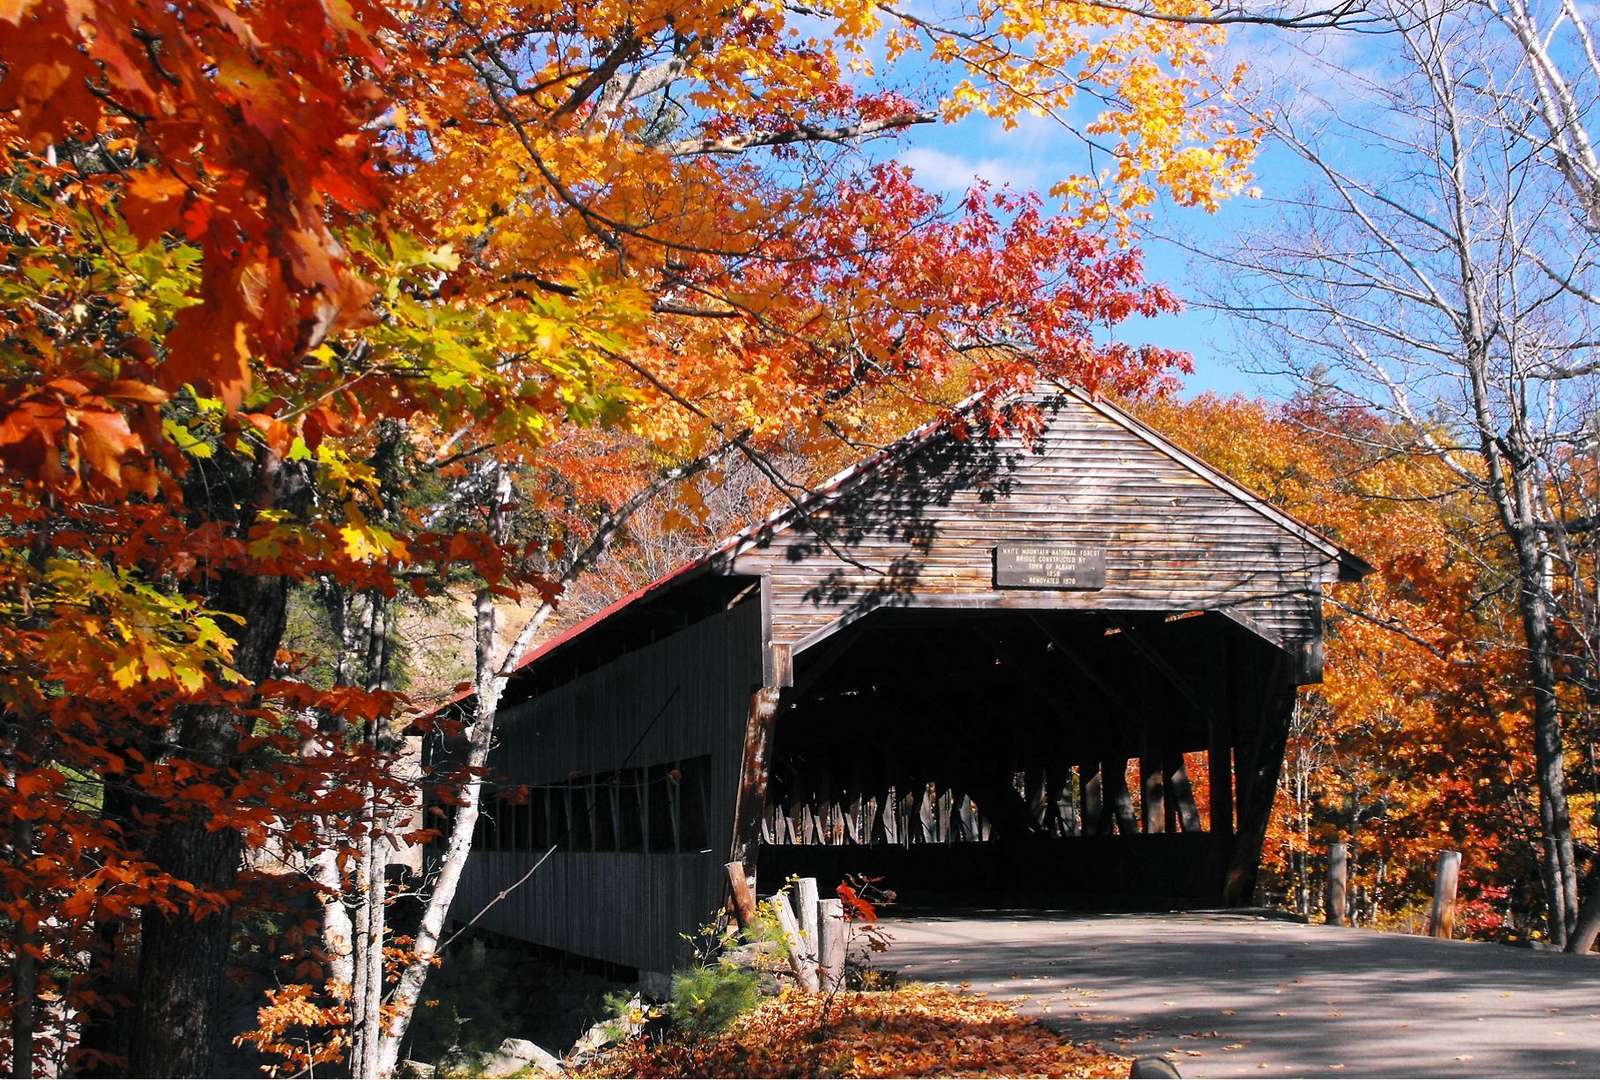 Covered Bridge In Vermont (USA) puzzle online from photo